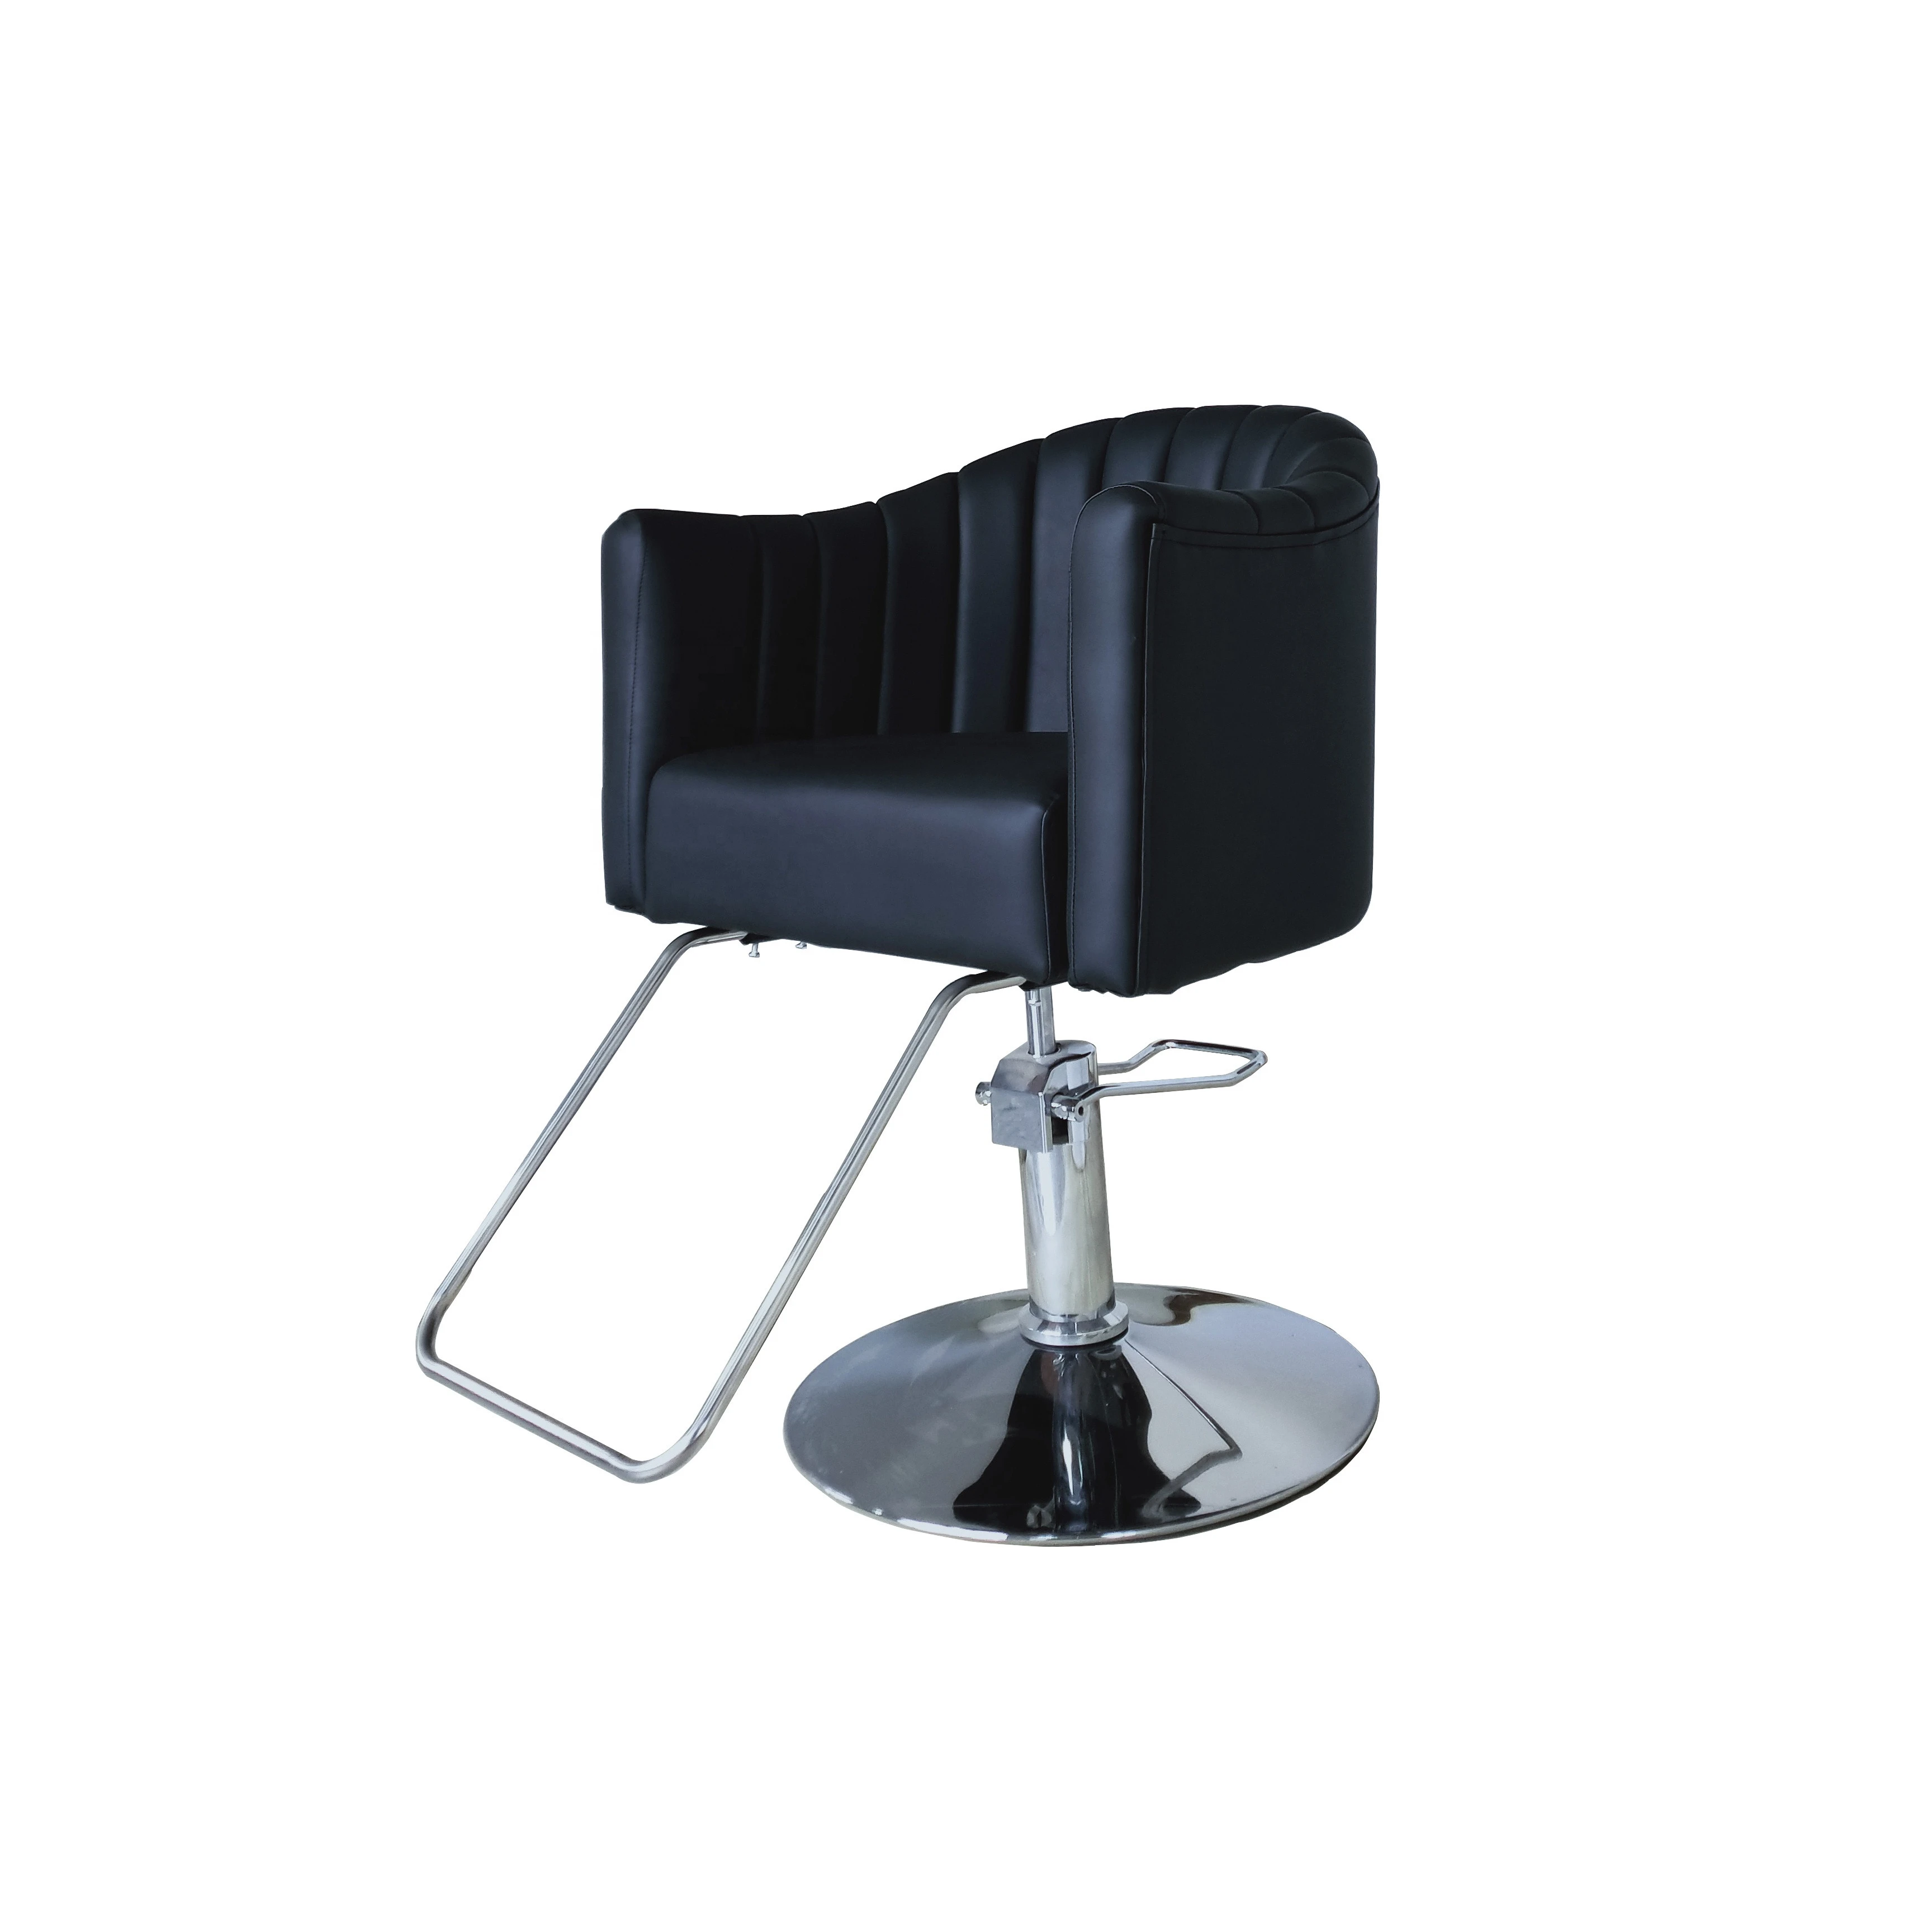 Beauty styling chair barbershop hair salon furniture set and package saloon equipment barber chair supplies